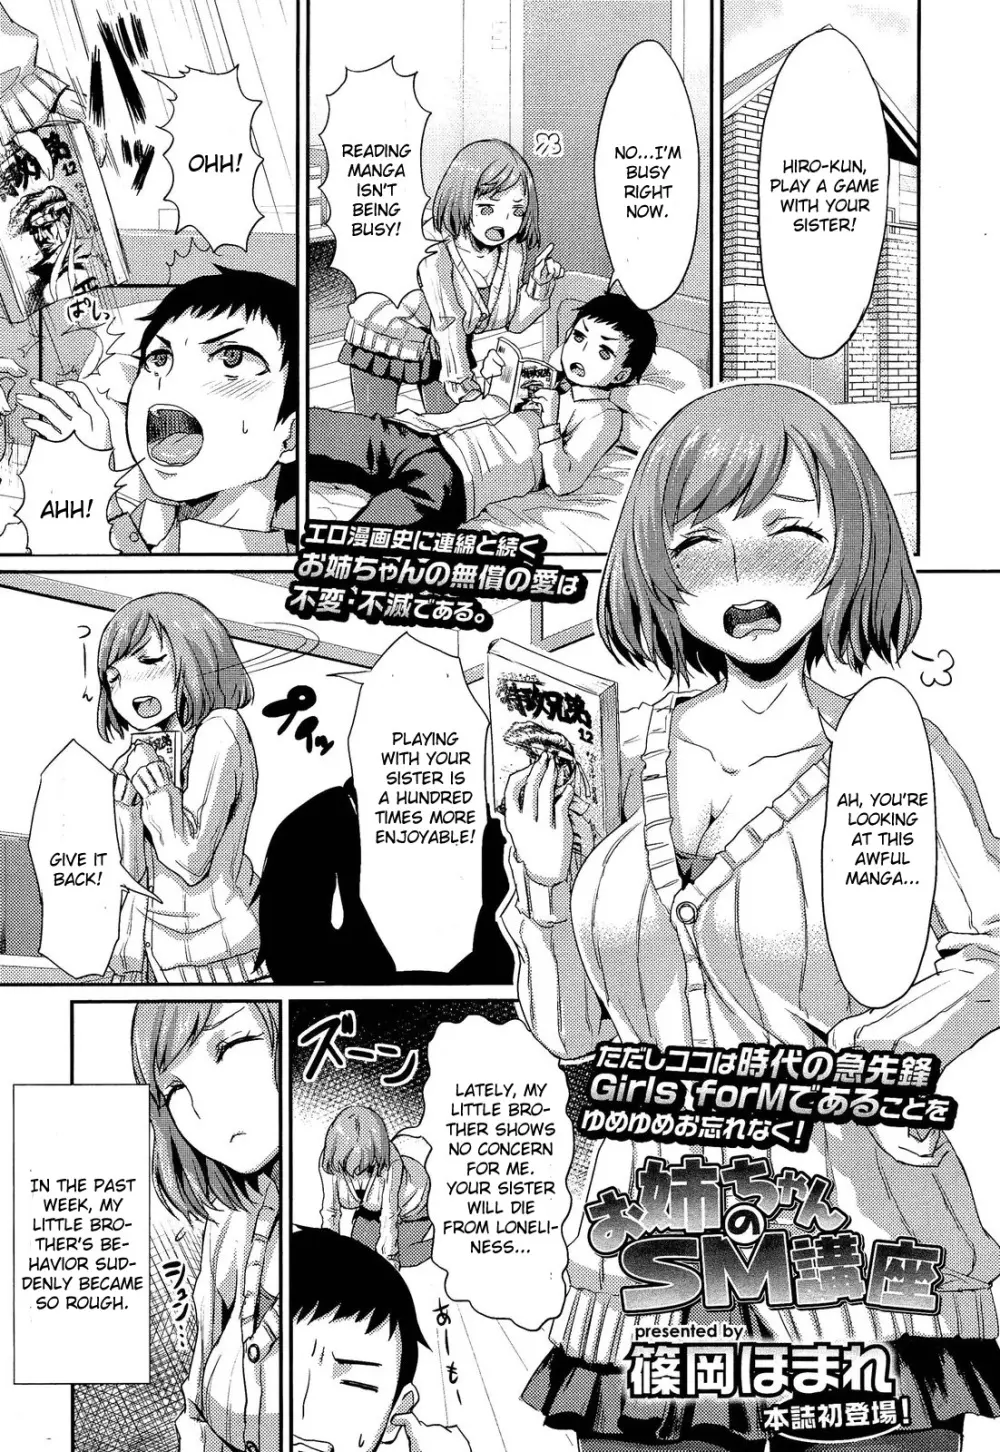 GIRL FOR M - CHAPTERS (VOL1 - 8 ) (ENGLISH) part n°1 Page.185